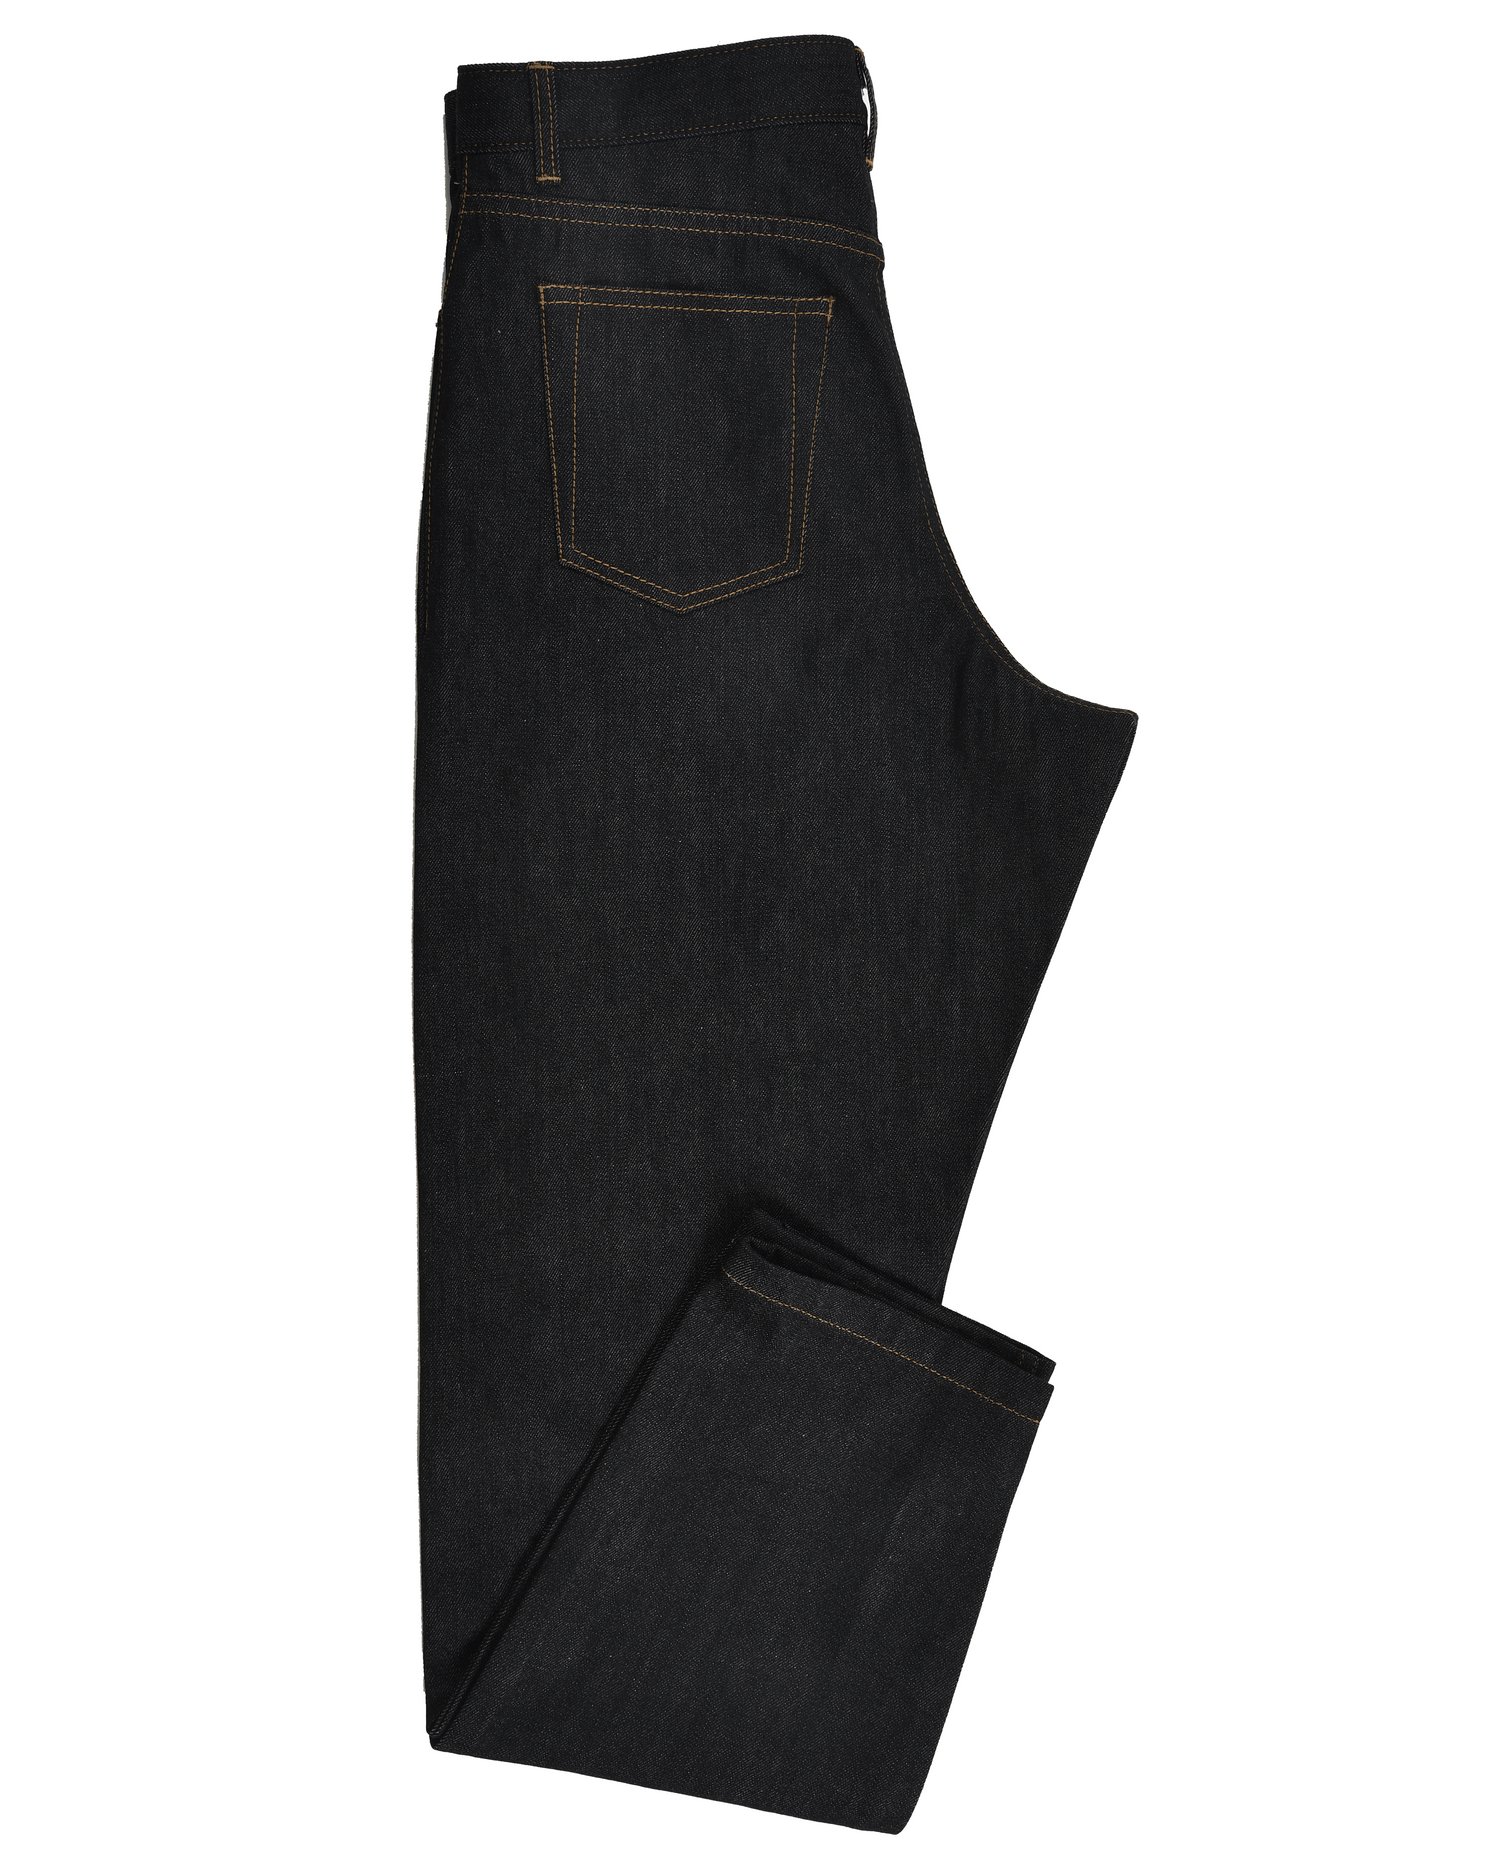 Side view of mens jeans by Luxire in midnight grey 2